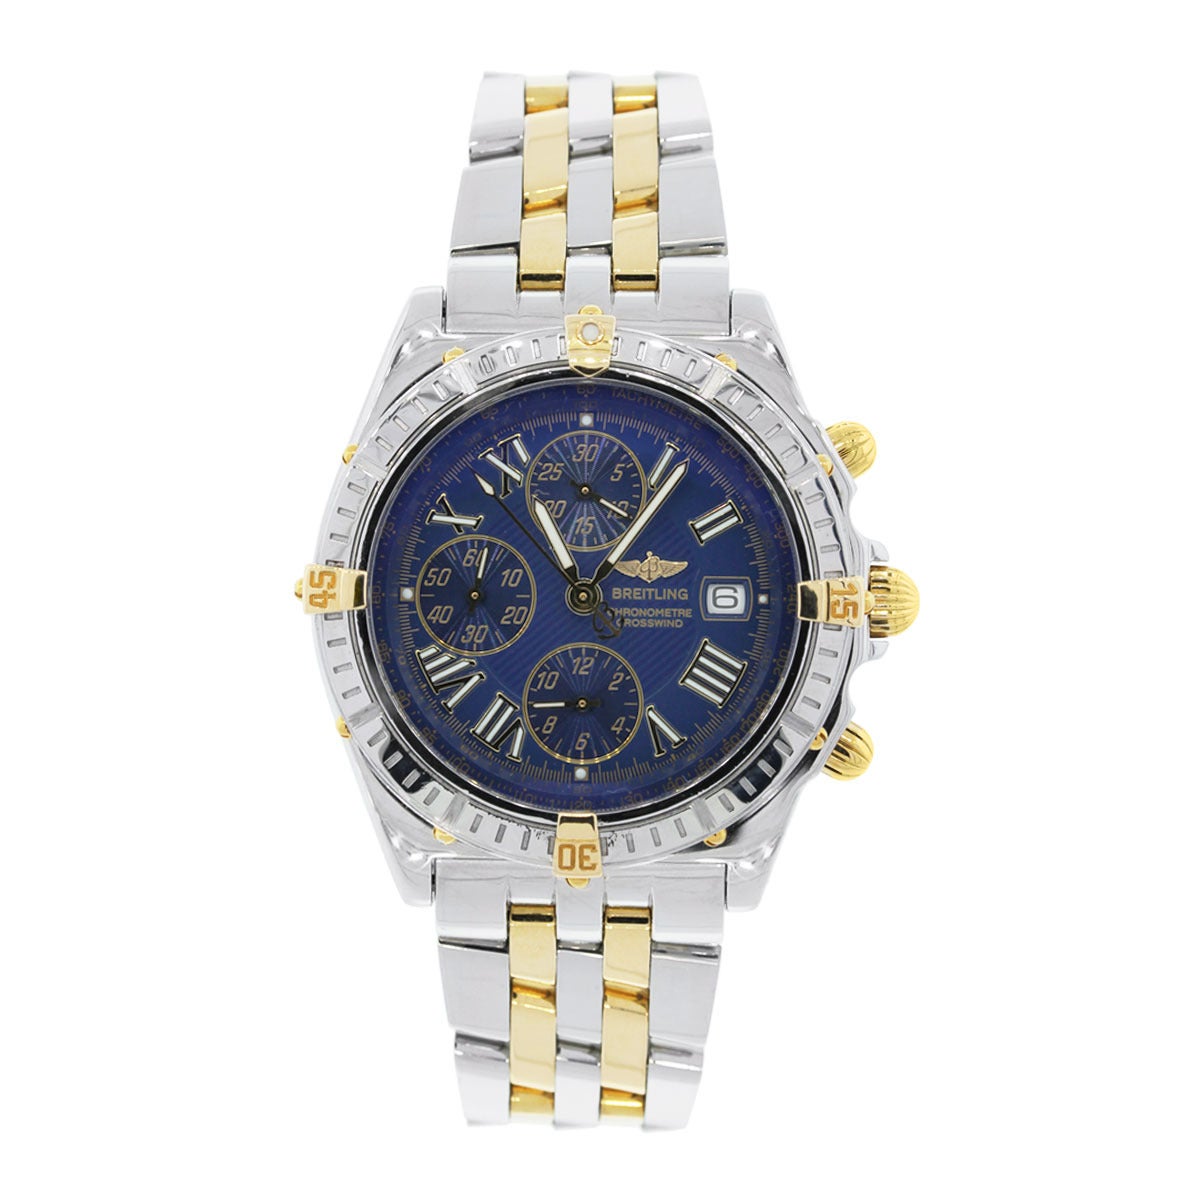 Brand: Breitling
Model: Crosswind B13355
Material: Stainless Steel & 18k Yellow Gold
Dial: Blue Chronograph Dial with Luminescent markers
Bezel: Unidirectional bezel
Case Measurements: 42mm
Band Material : Stainless Steel & 18k Yellow